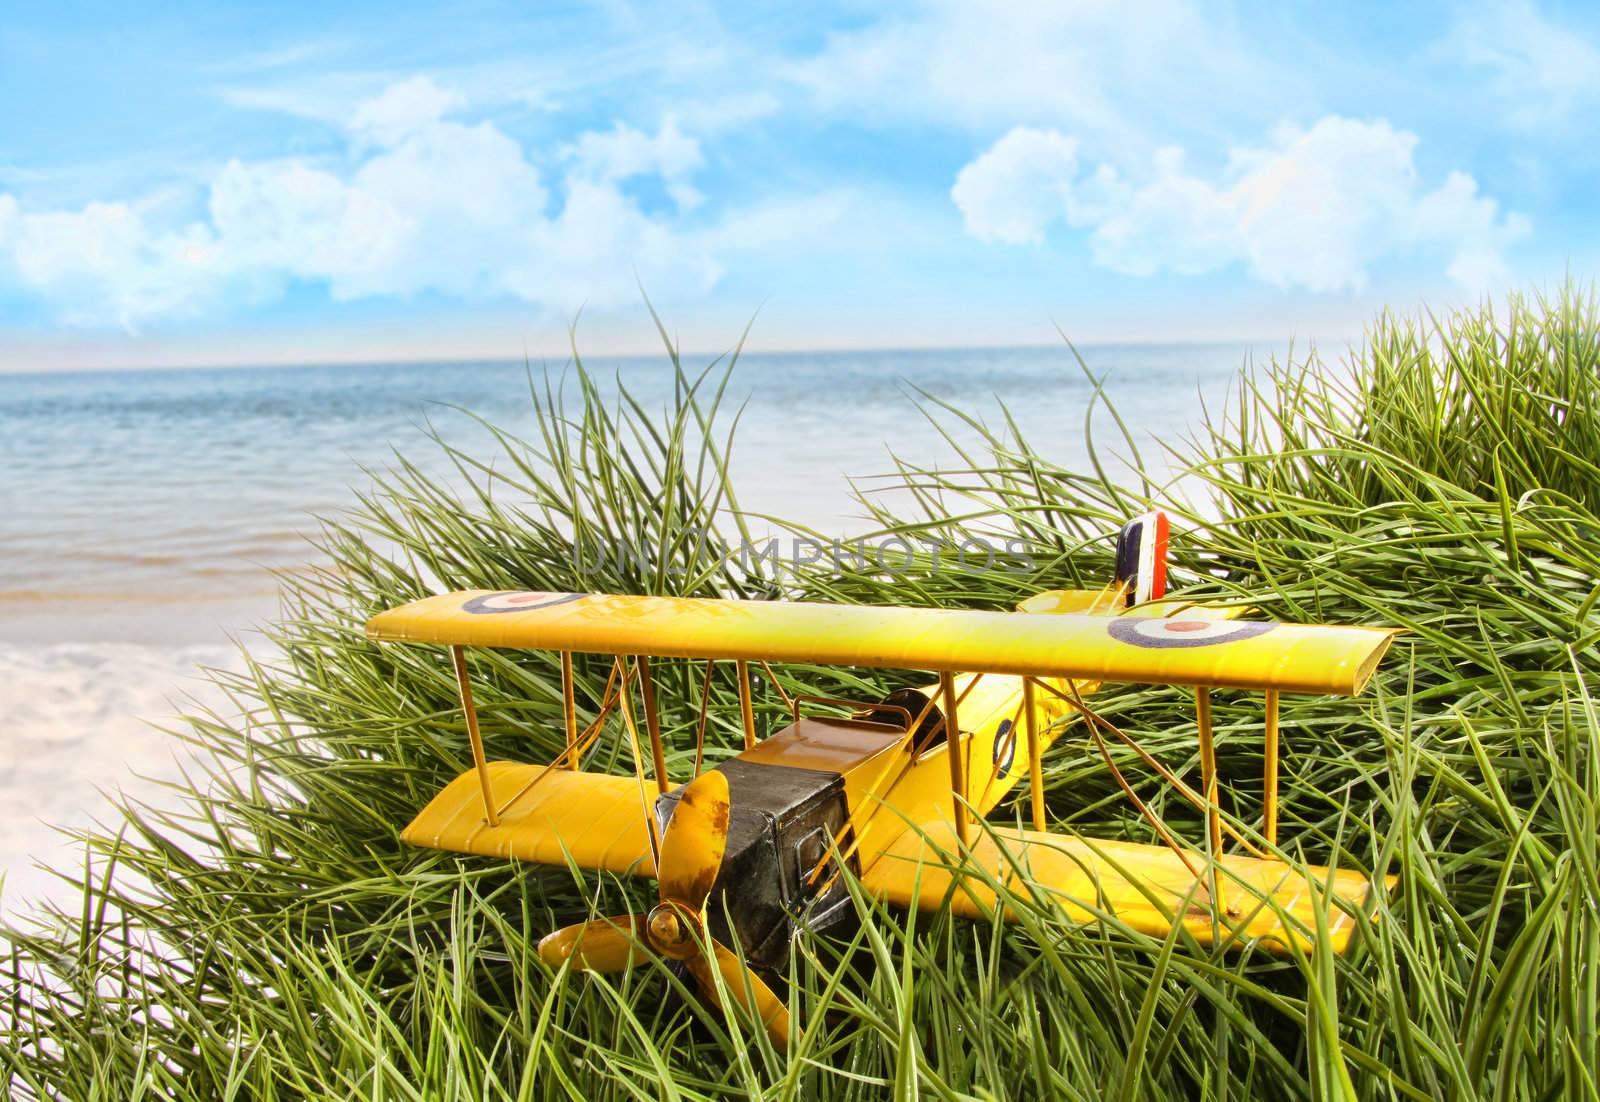 Vintage toy plane in tall grass at the beach by Sandralise